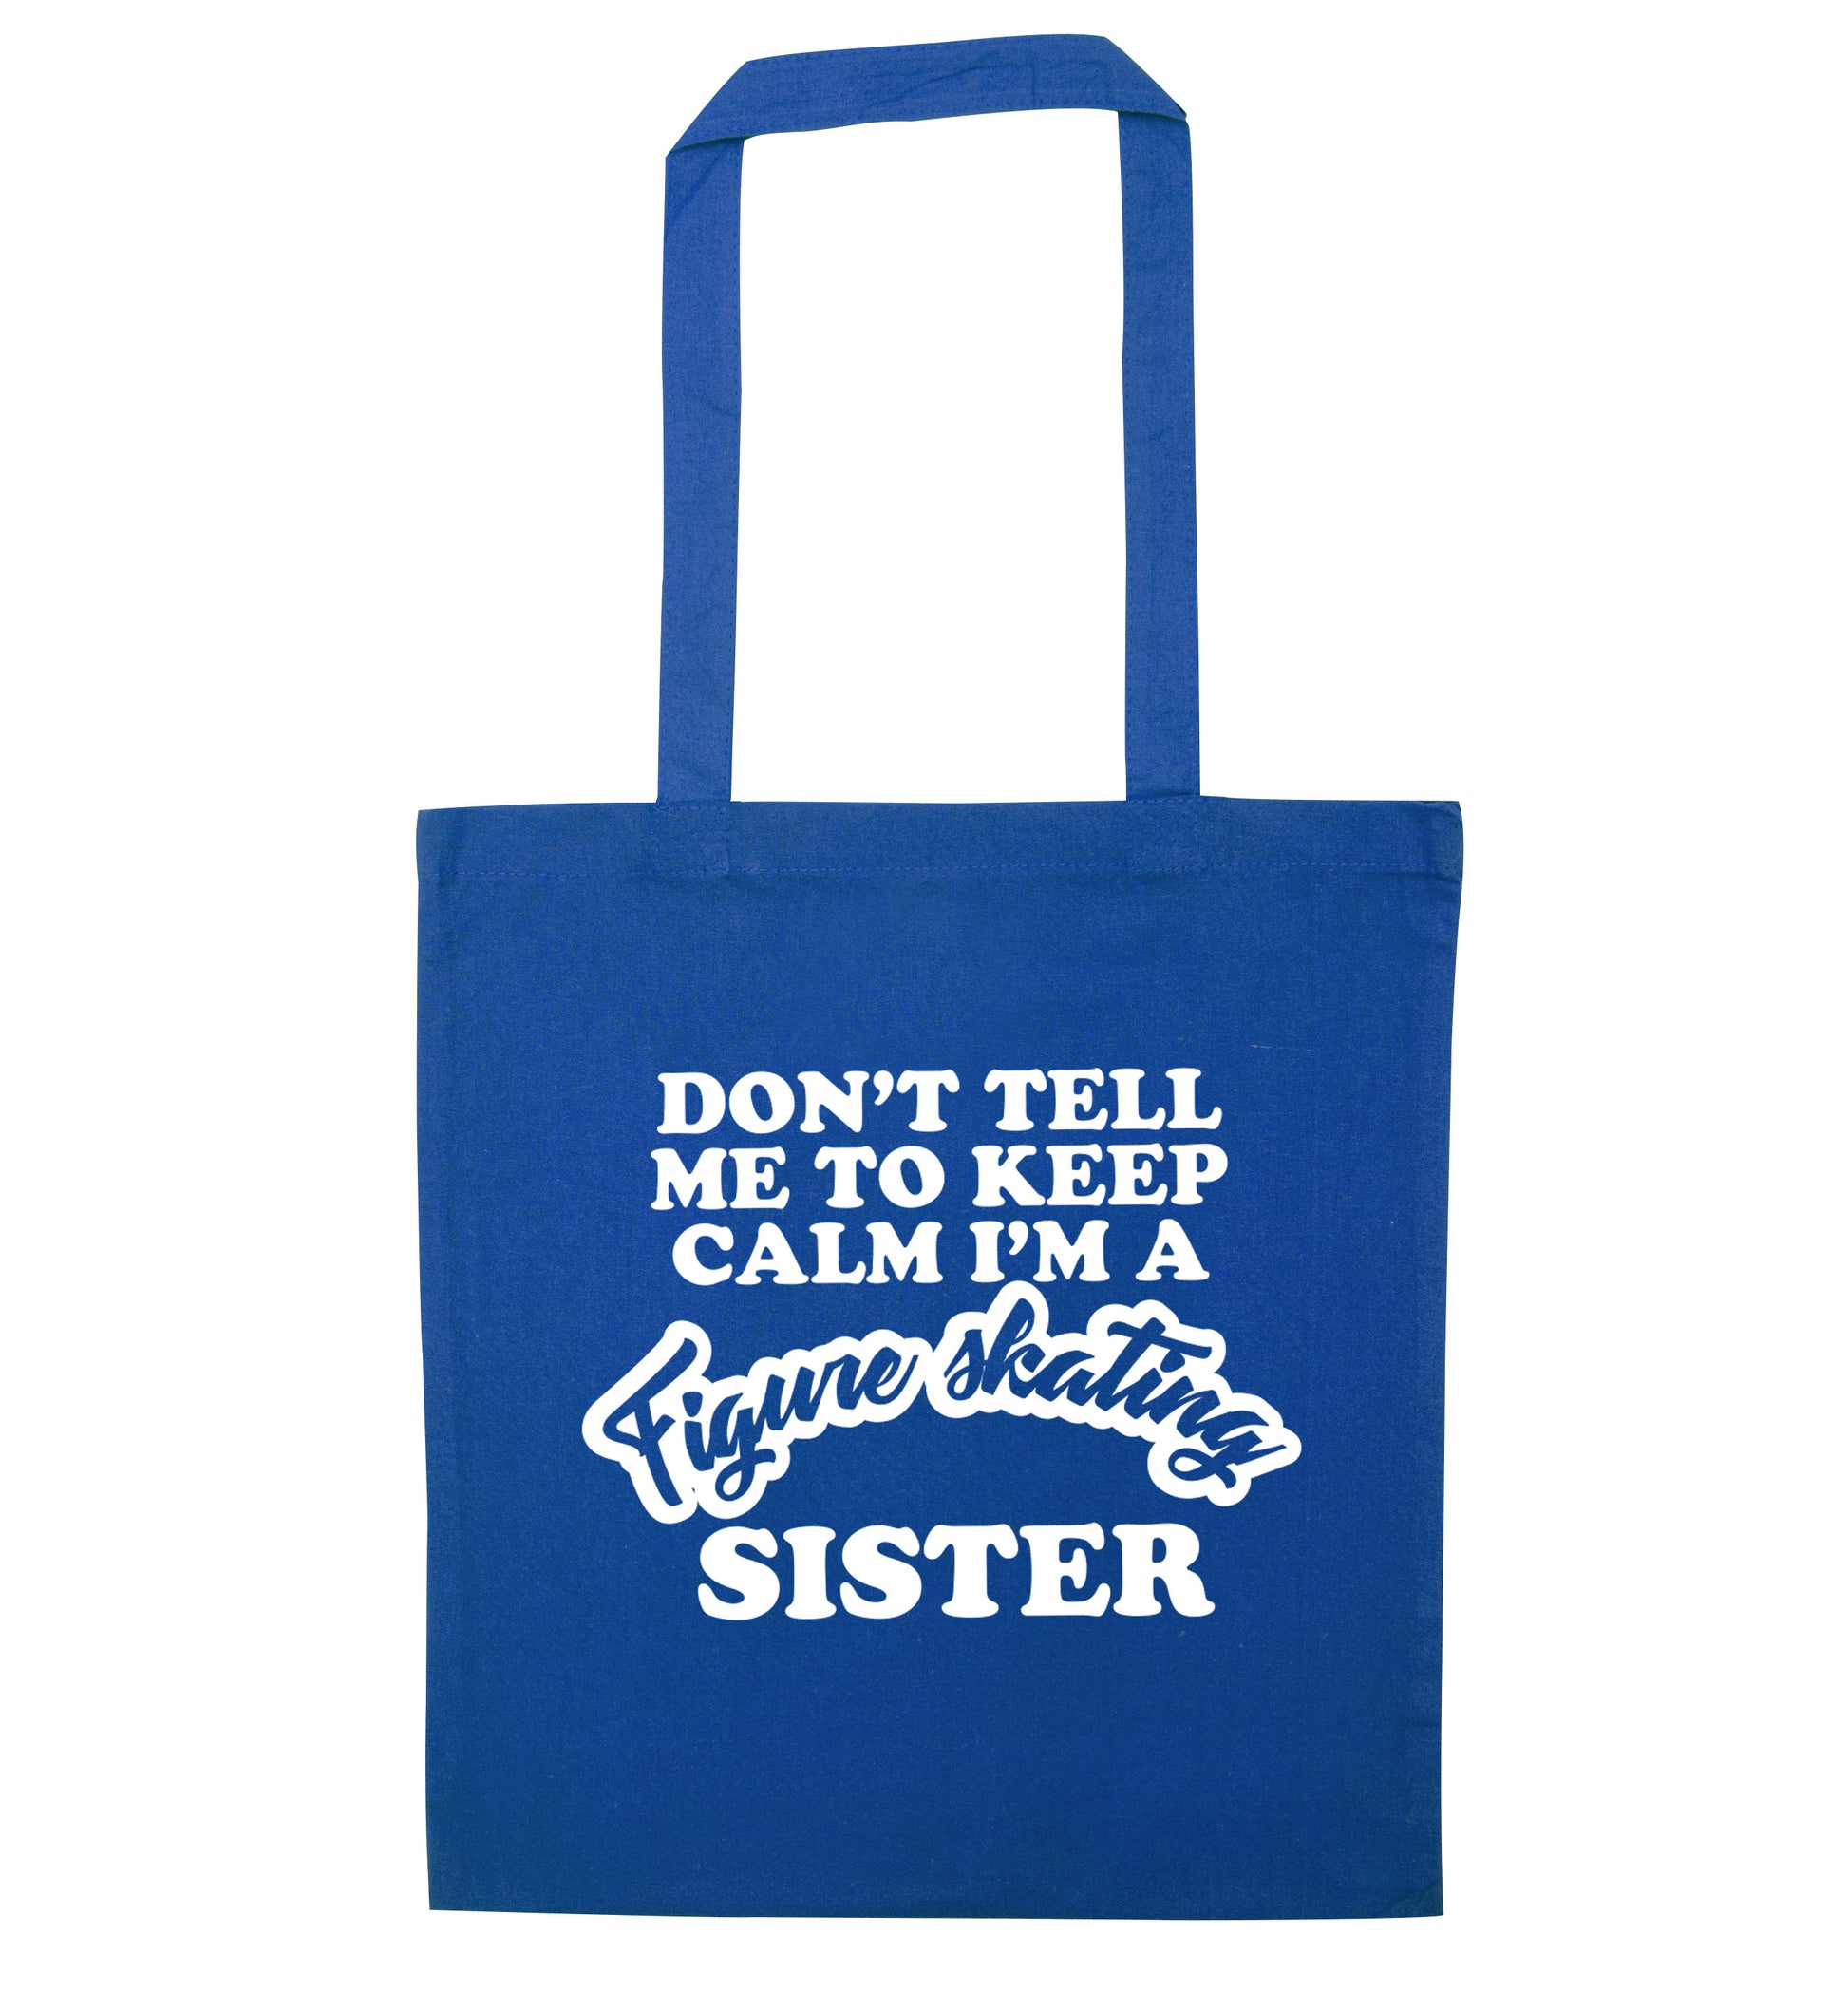 Don't tell me to keep calm I'm a figure skating sister blue tote bag